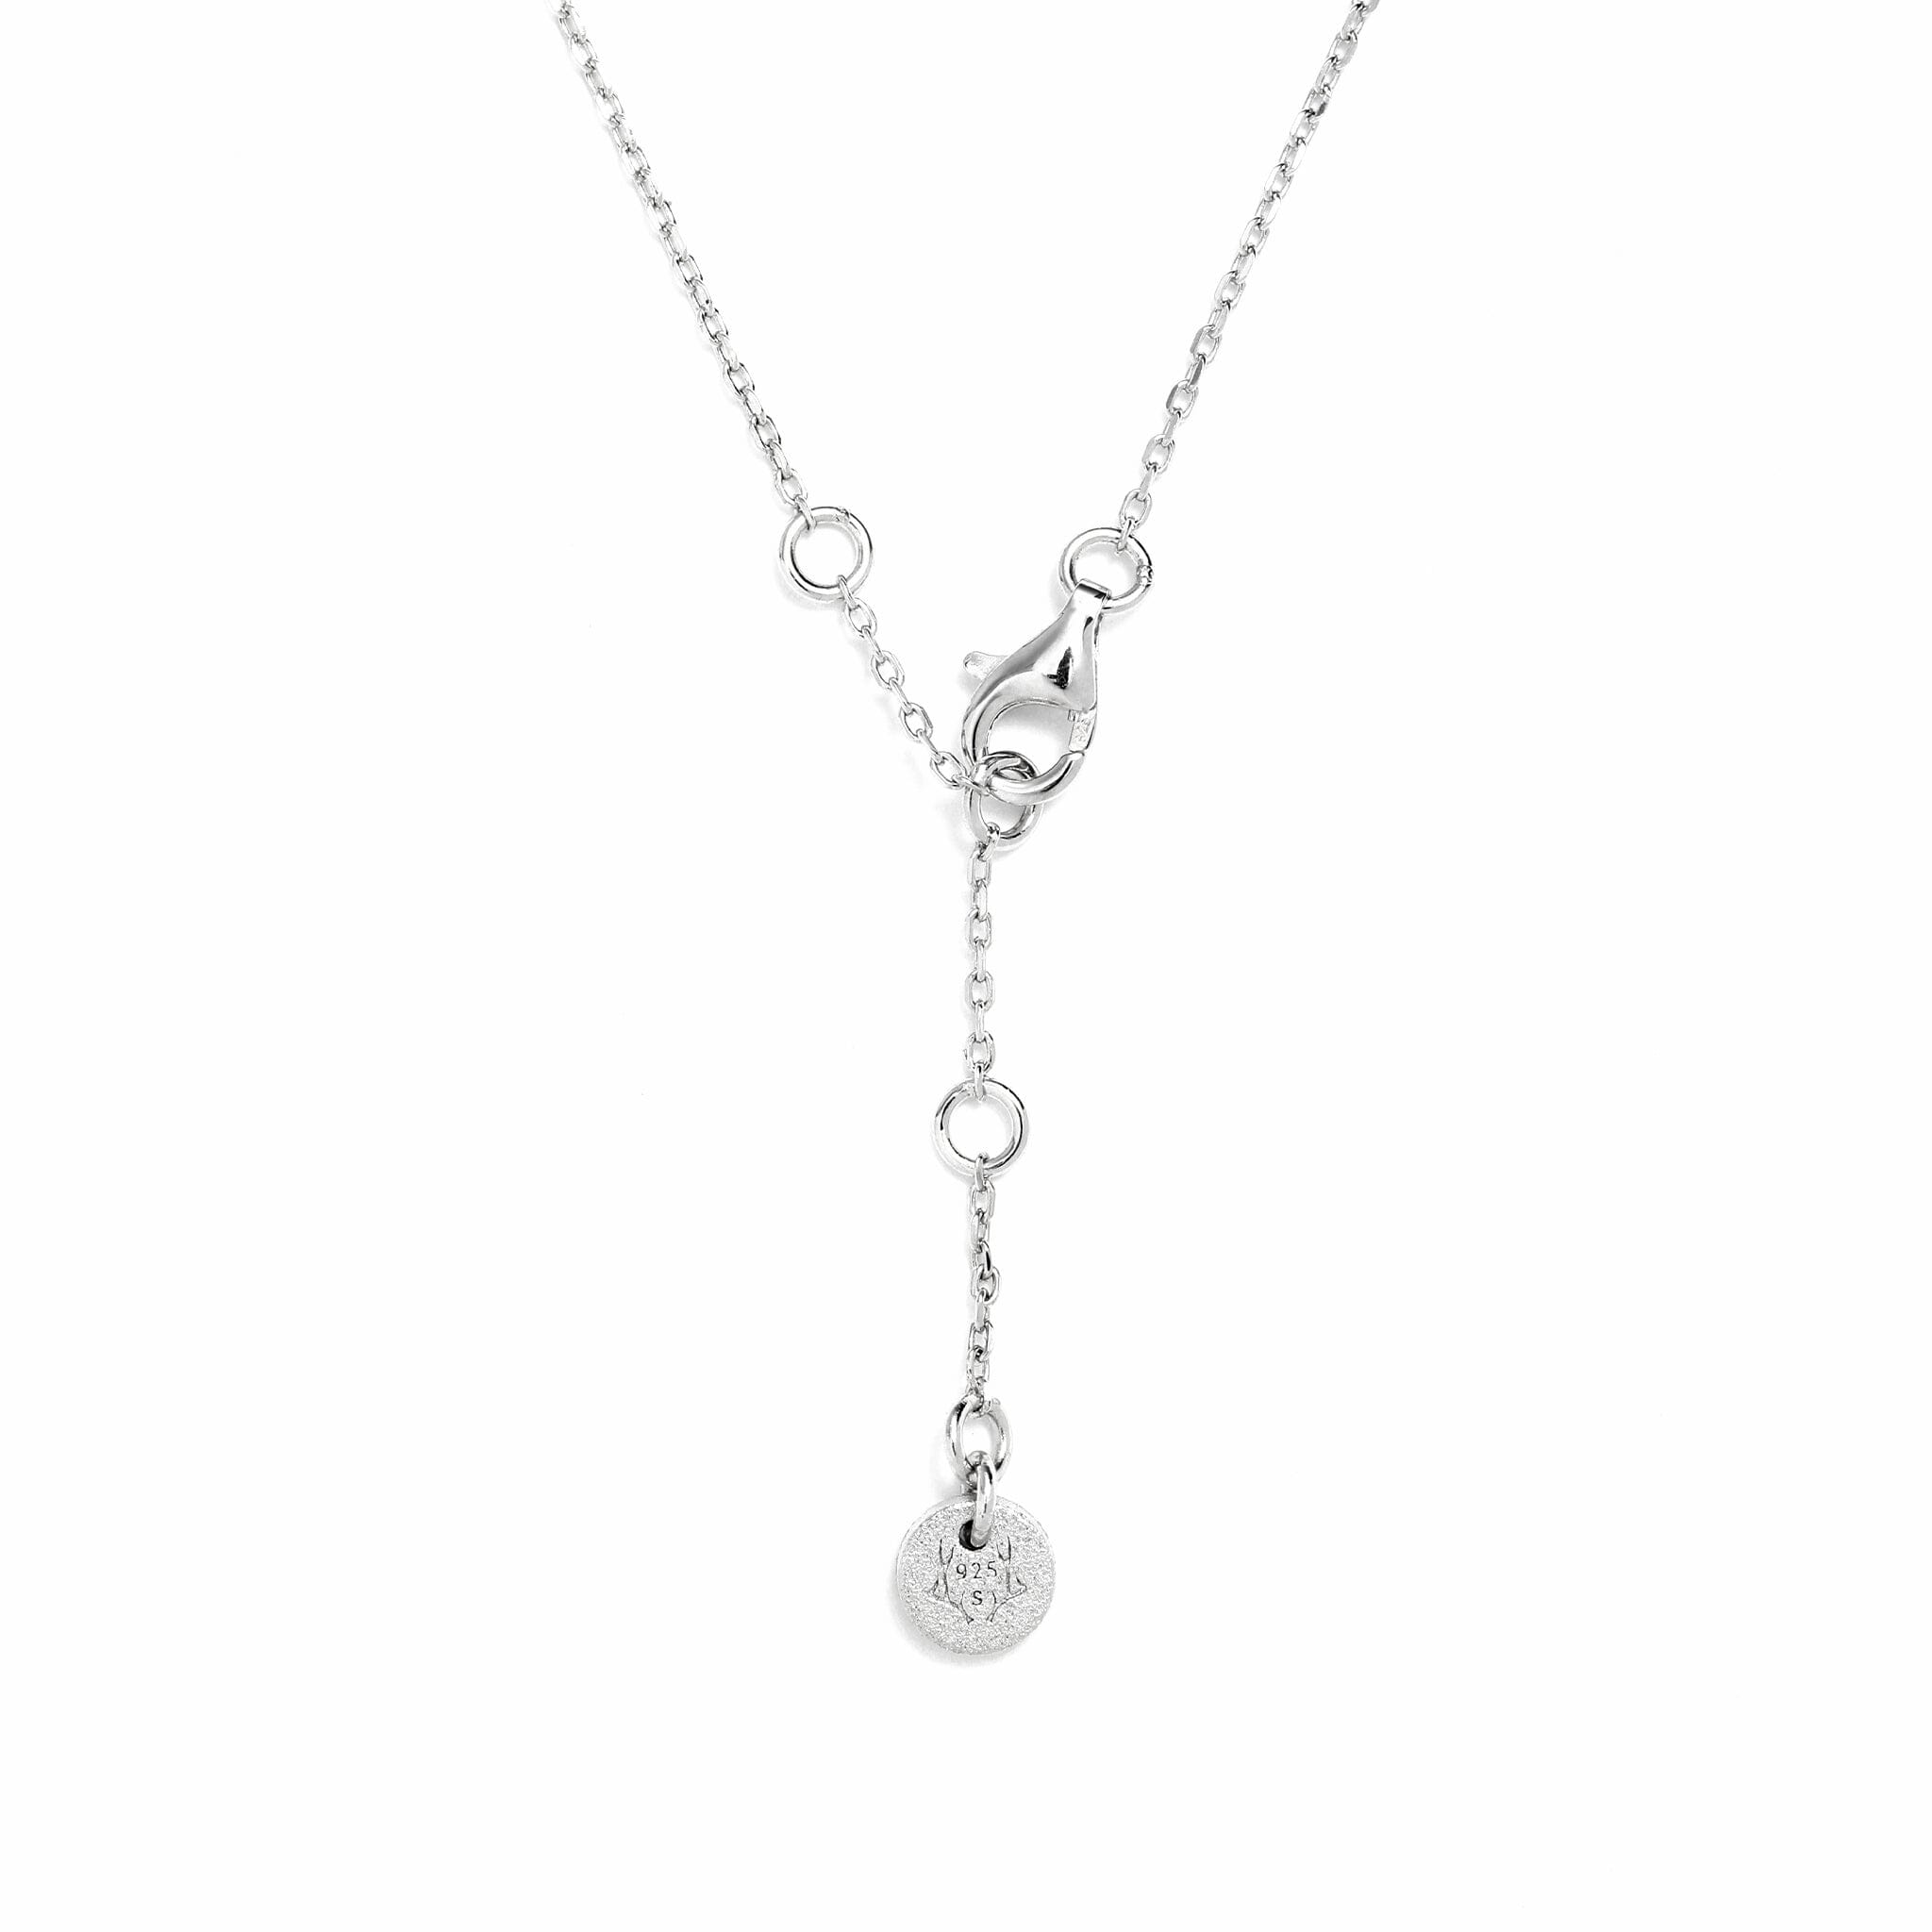 Women's Silver Triangle Necklace with Meteorite Necklaces WAA FASHION GROUP 